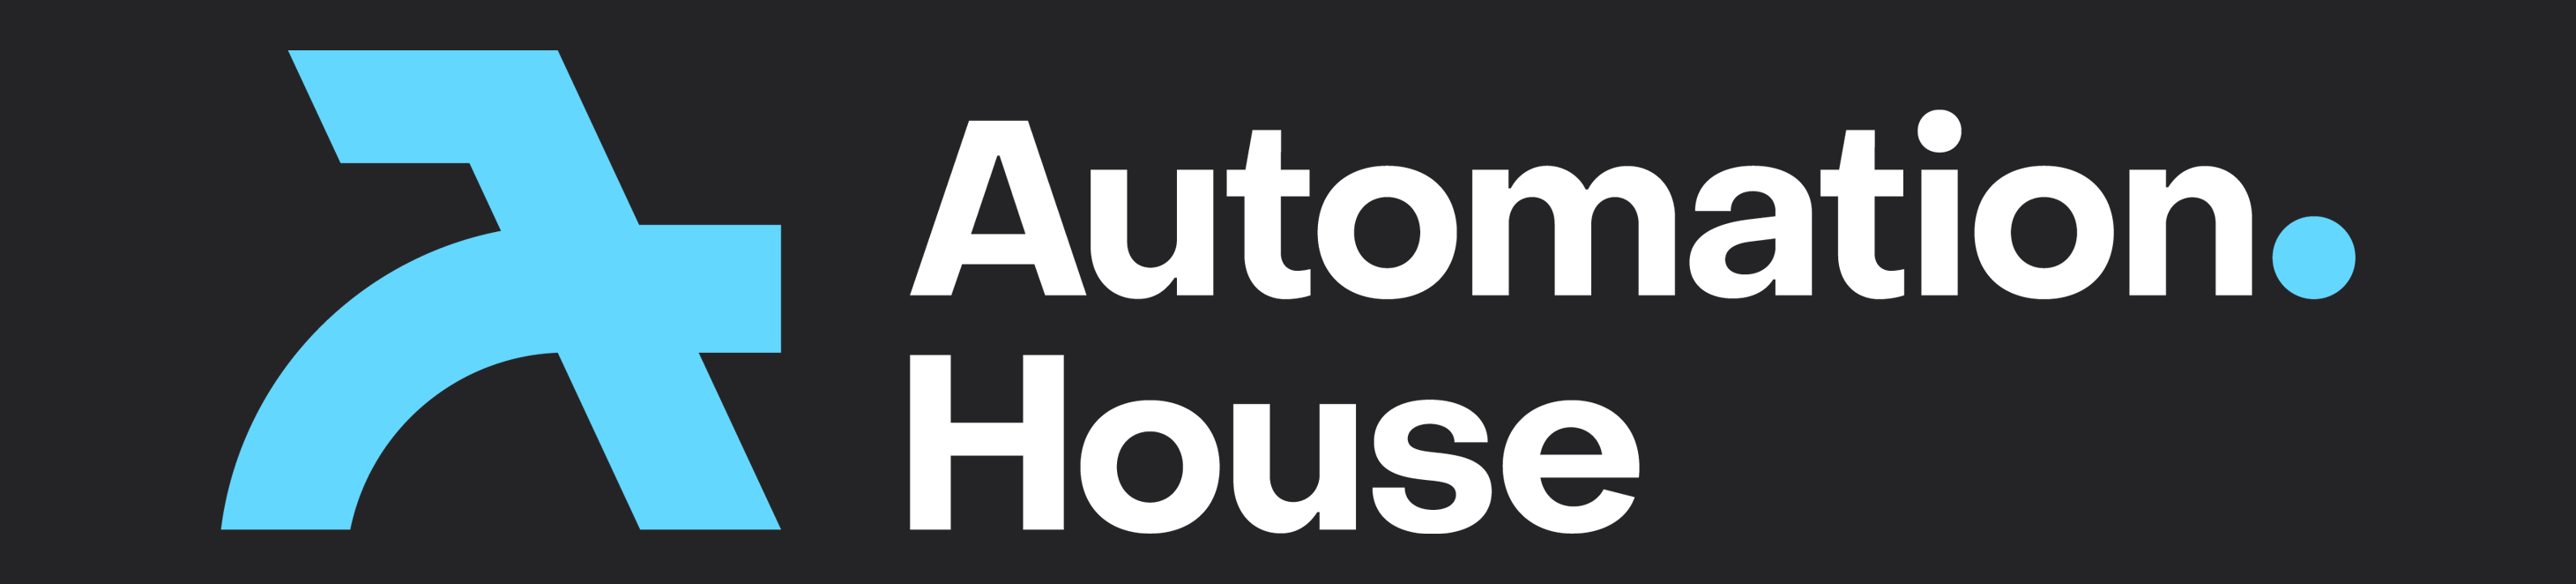 automation.house